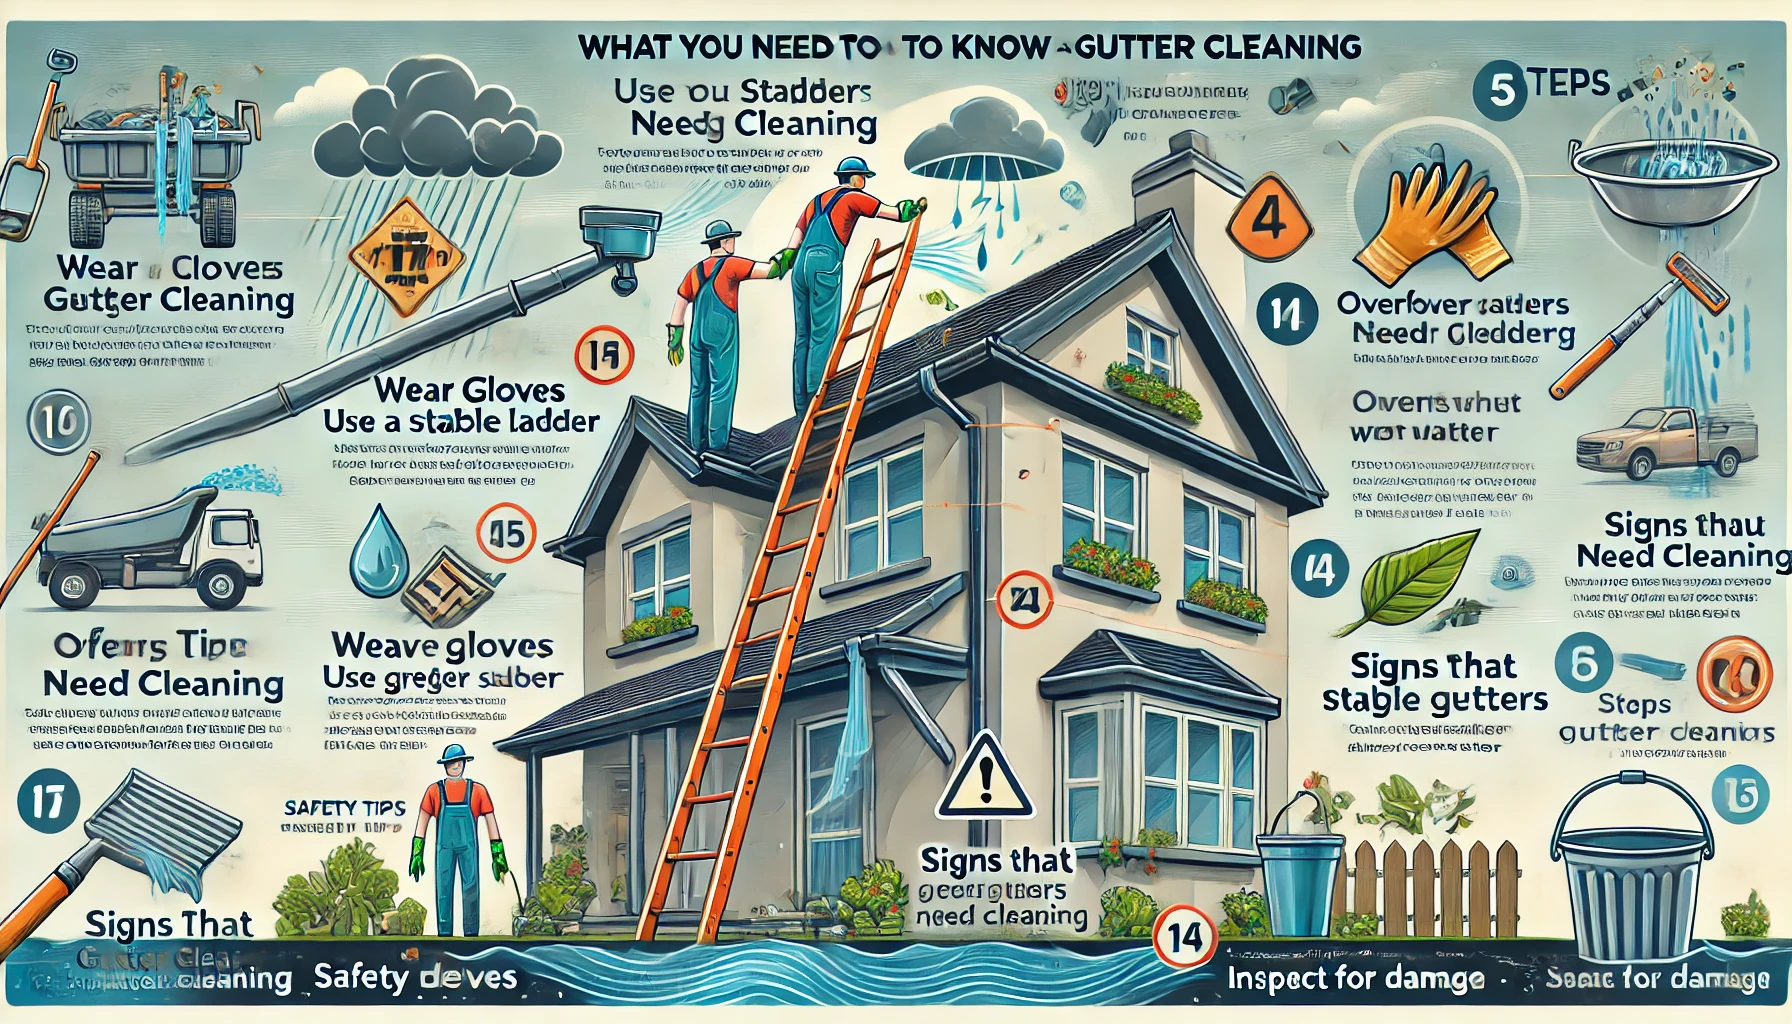 What You Need to Know About Gutter Cleaning